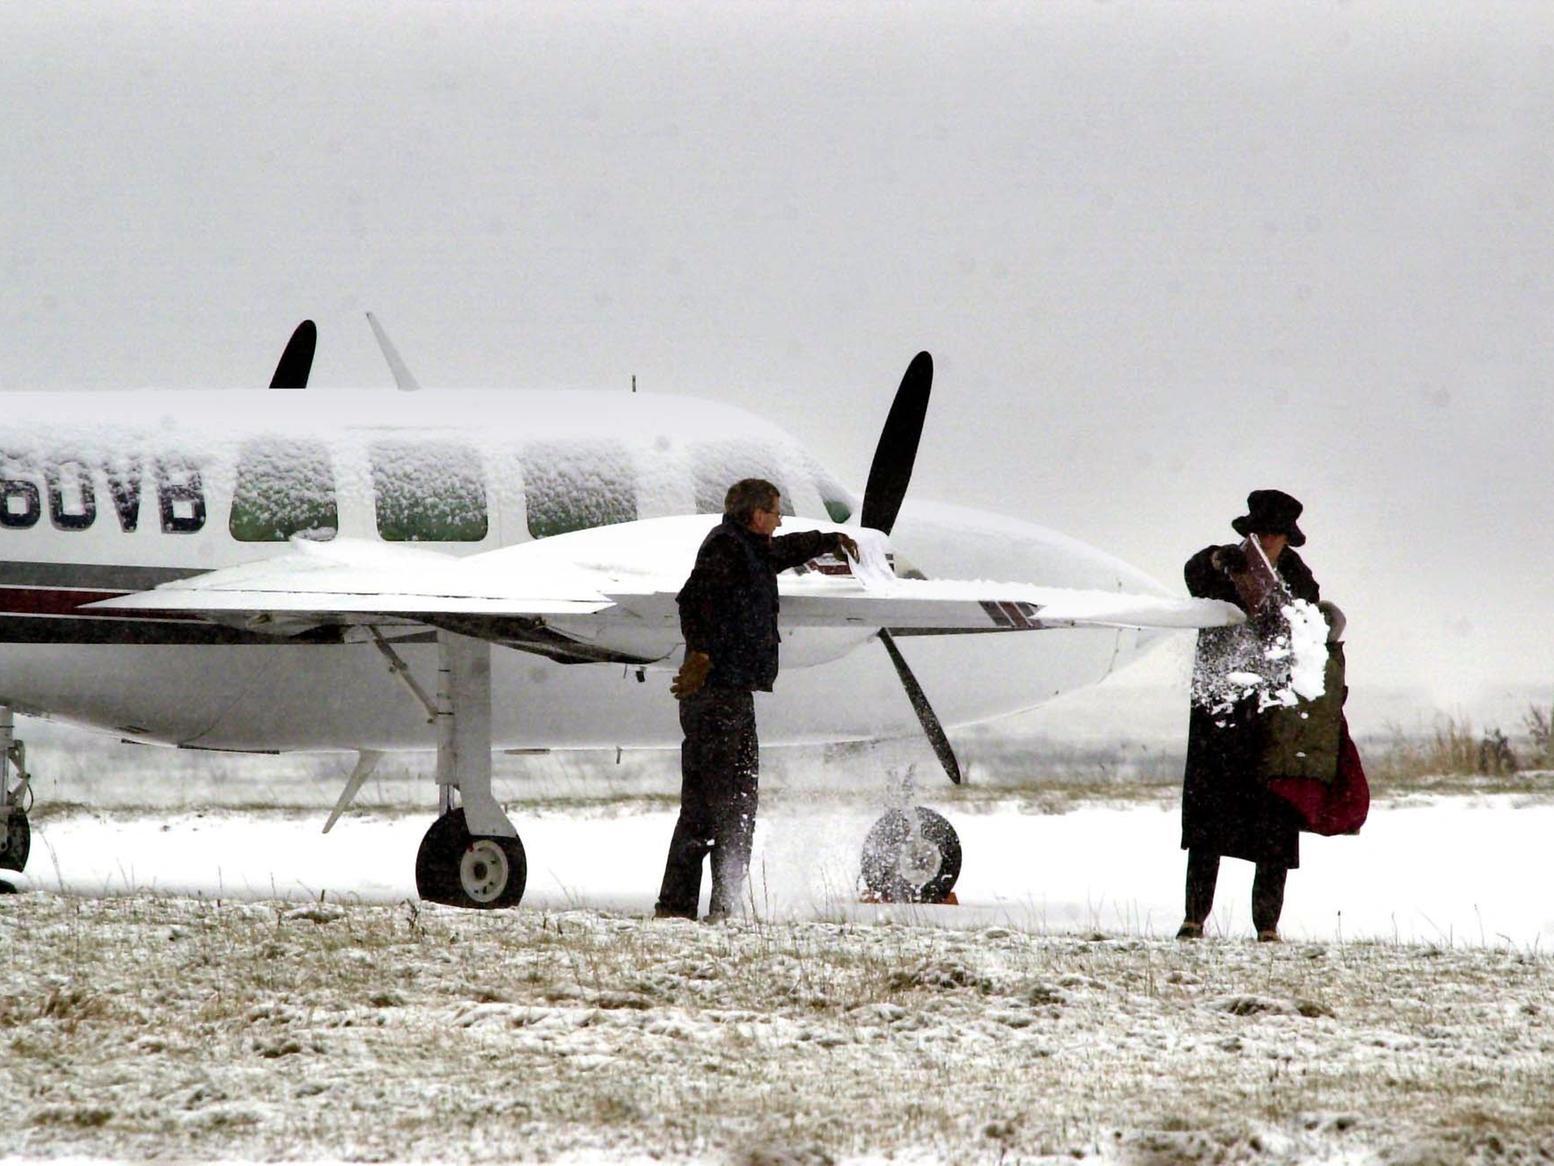 Two people brush off snow from a light aircraft, before taking to the air from Multiflight near Leeds Bradford Airport.